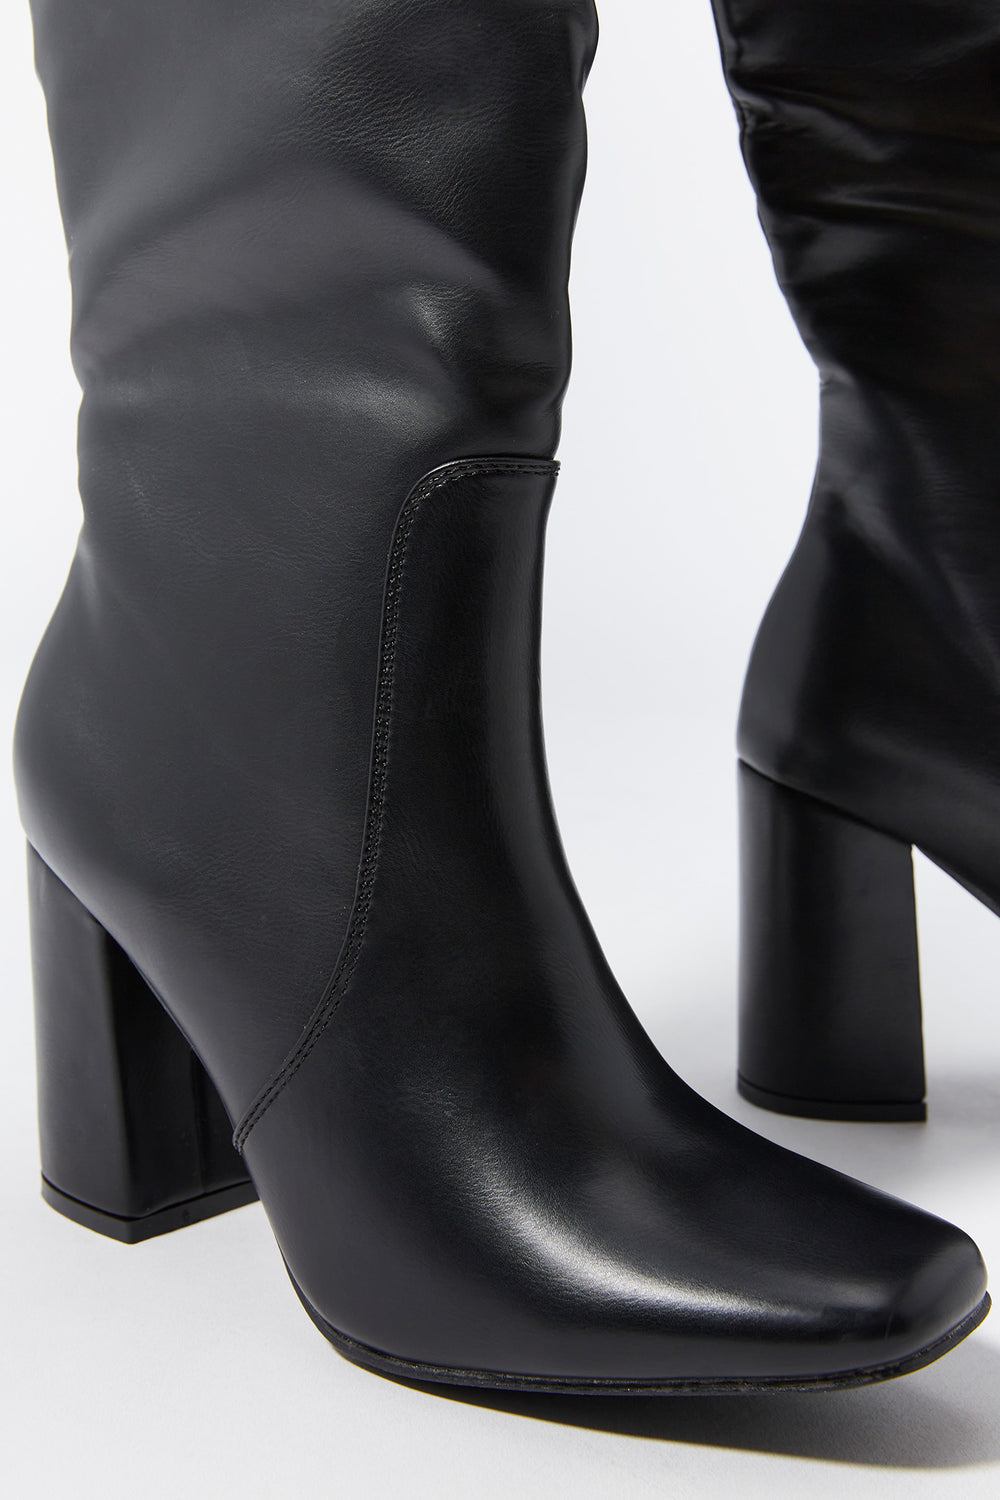 Faux Leather Knee High Heeled Boot Faux Leather Knee High Heeled Boot 8